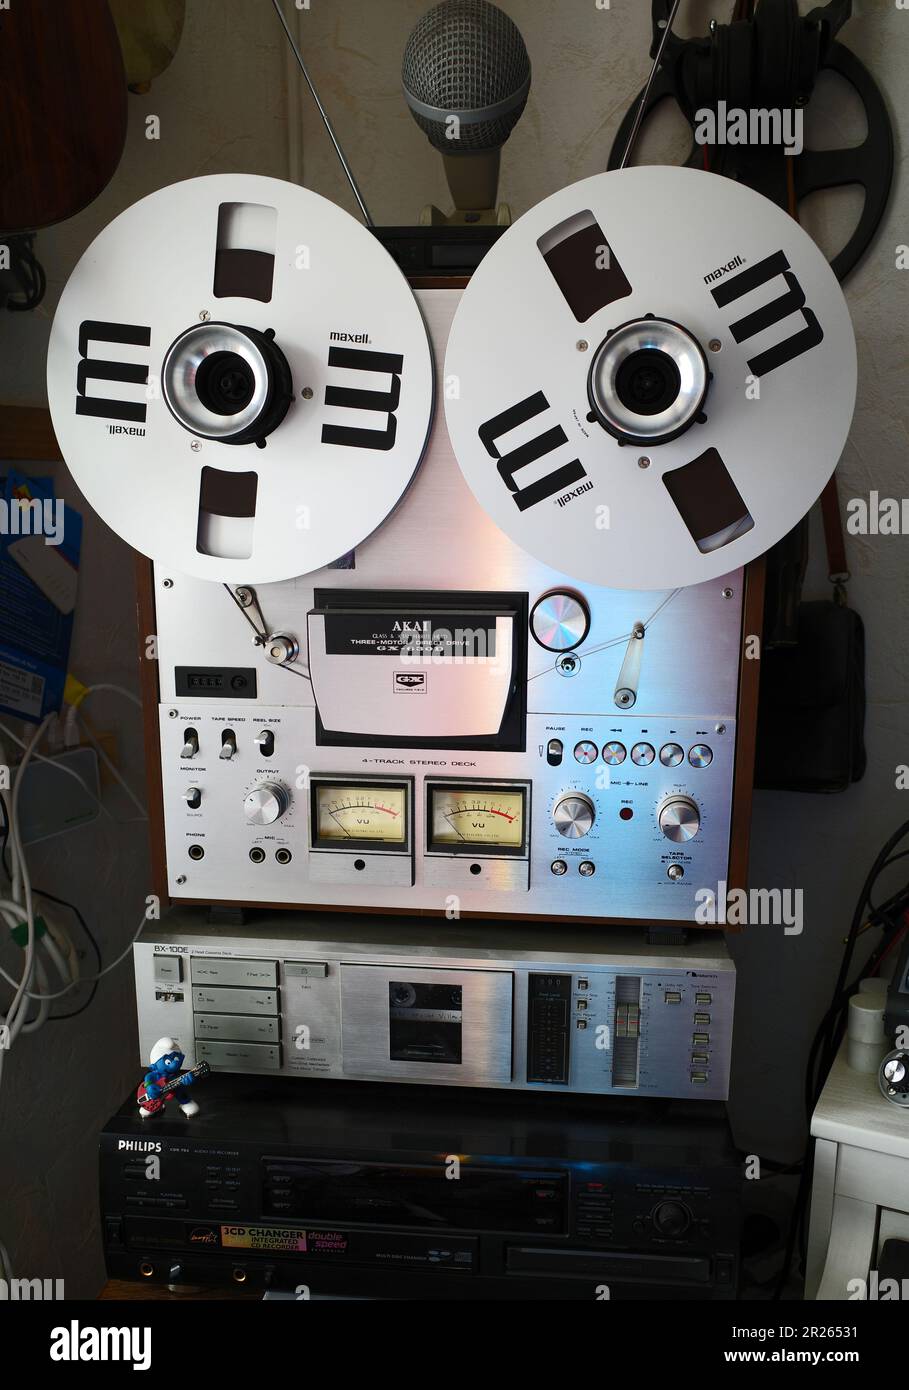 https://c8.alamy.com/comp/2R26531/itterbeck-germany-april-30-2023-old-fashioned-reel-to-reel-tape-recorder-from-akai-with-maxell-reels-on-a-nakamichi-cassette-deck-at-the-bottom-is-a-2R26531.jpg